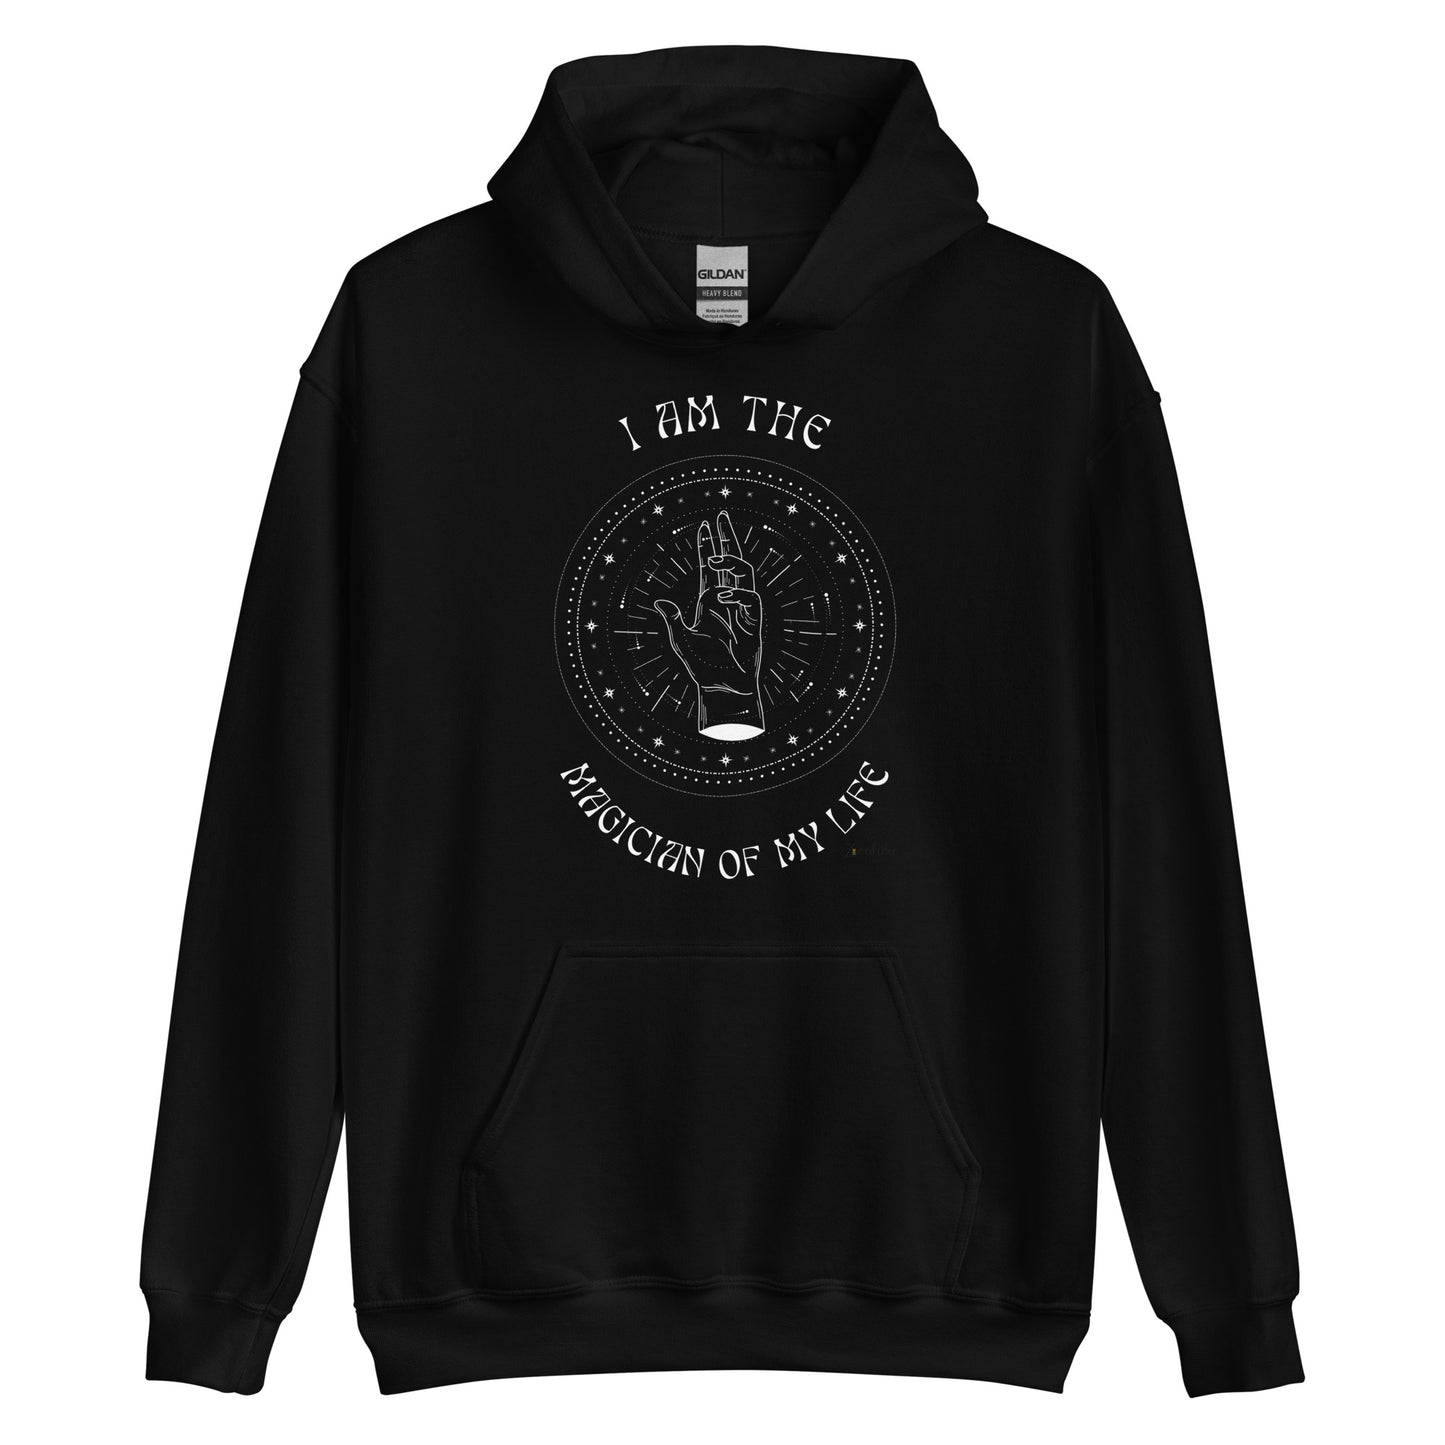 I AM The Magician of My Life - Unisex Hoodie